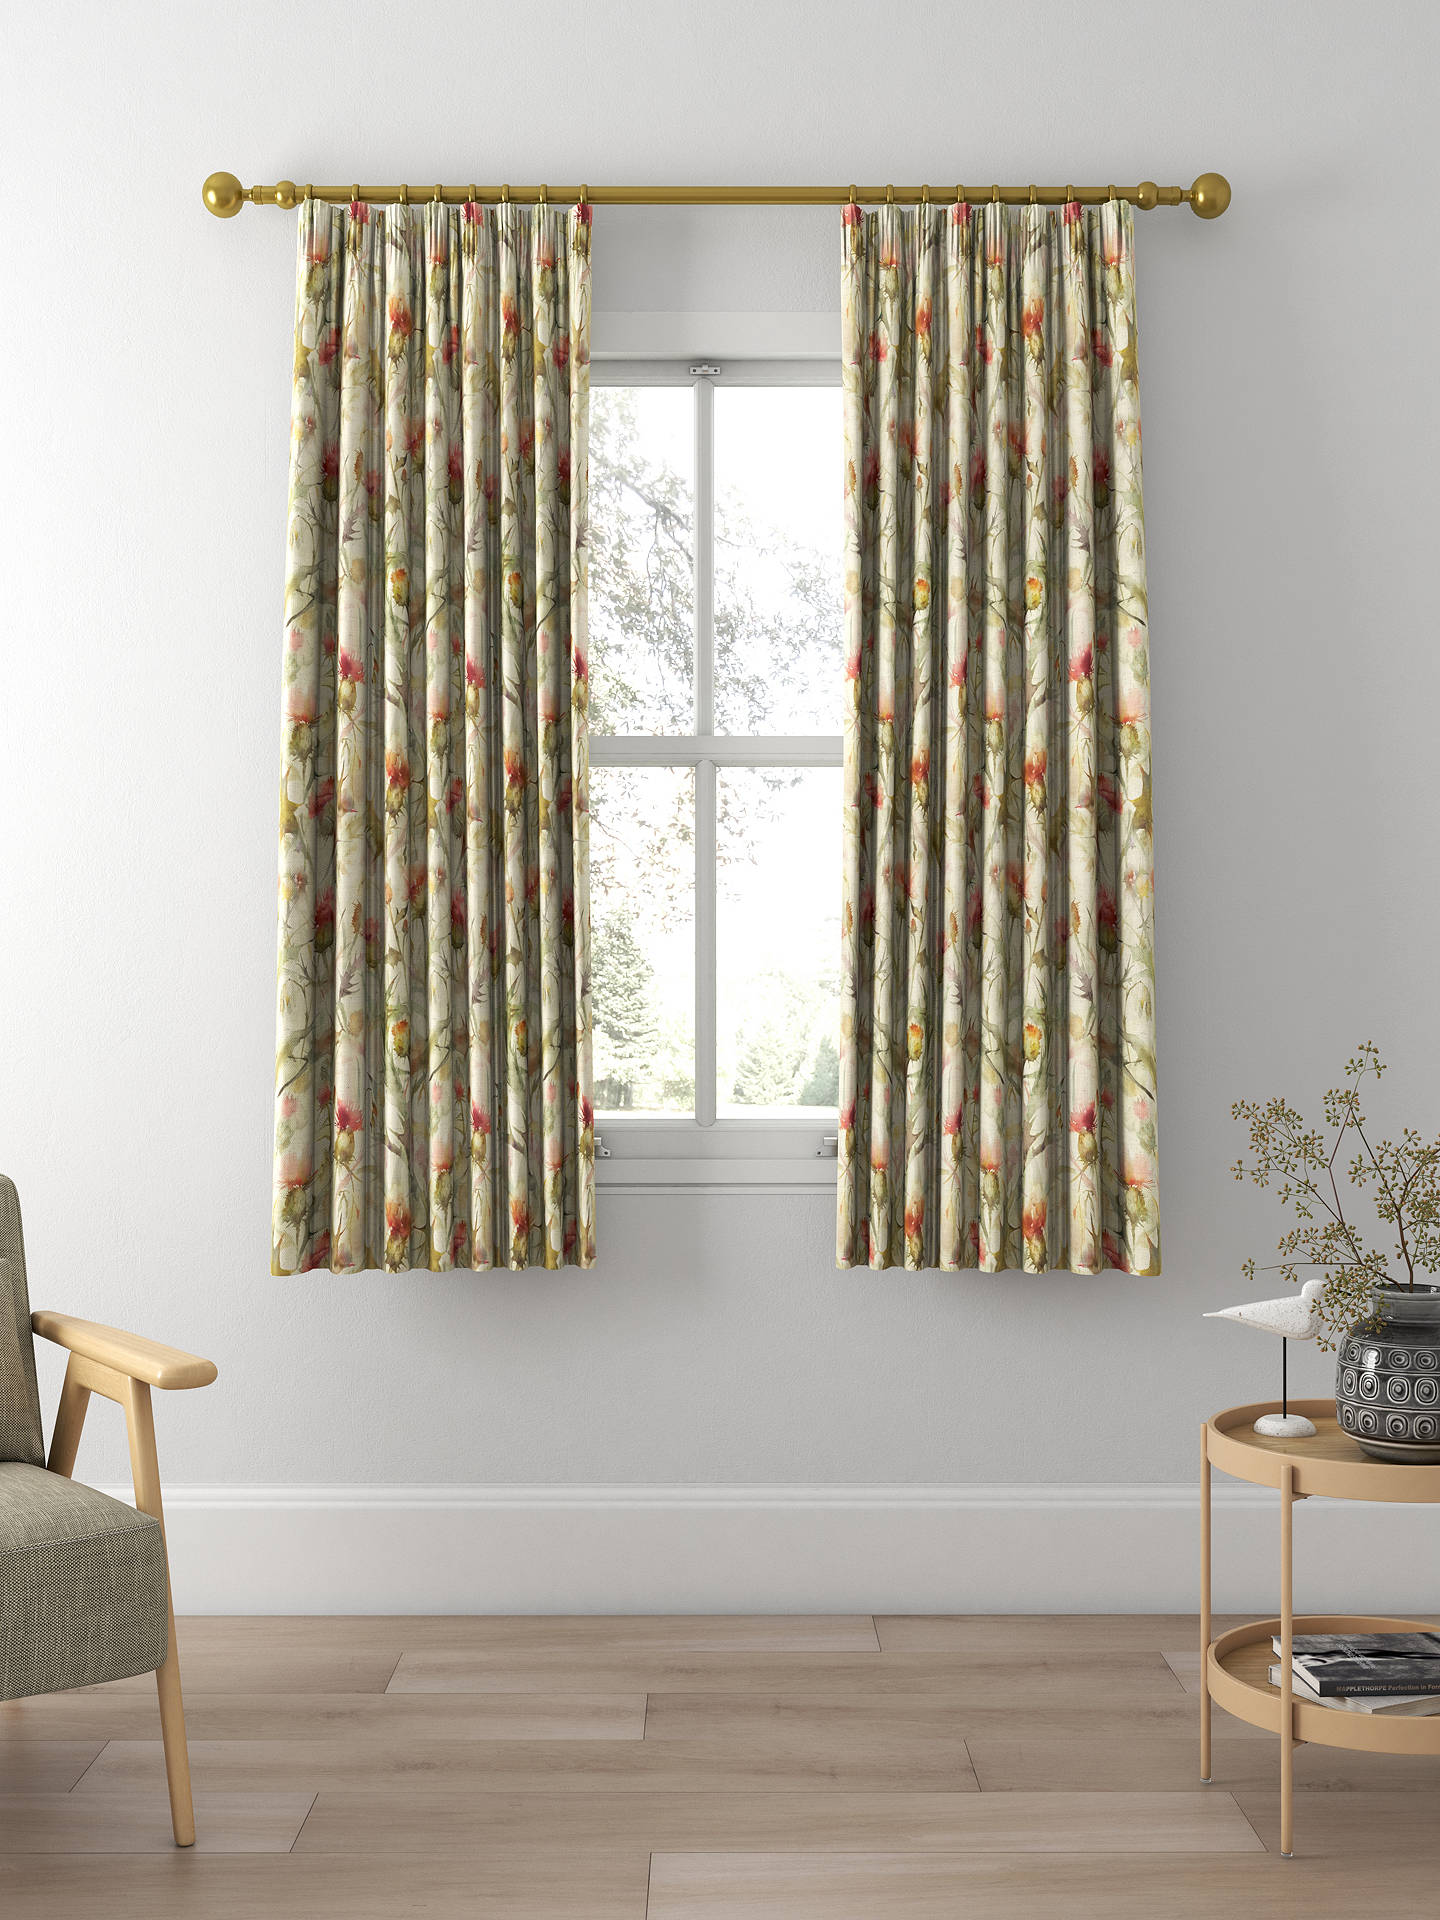 Voyage Cirsiun Made to Measure Curtains, Cream Russett